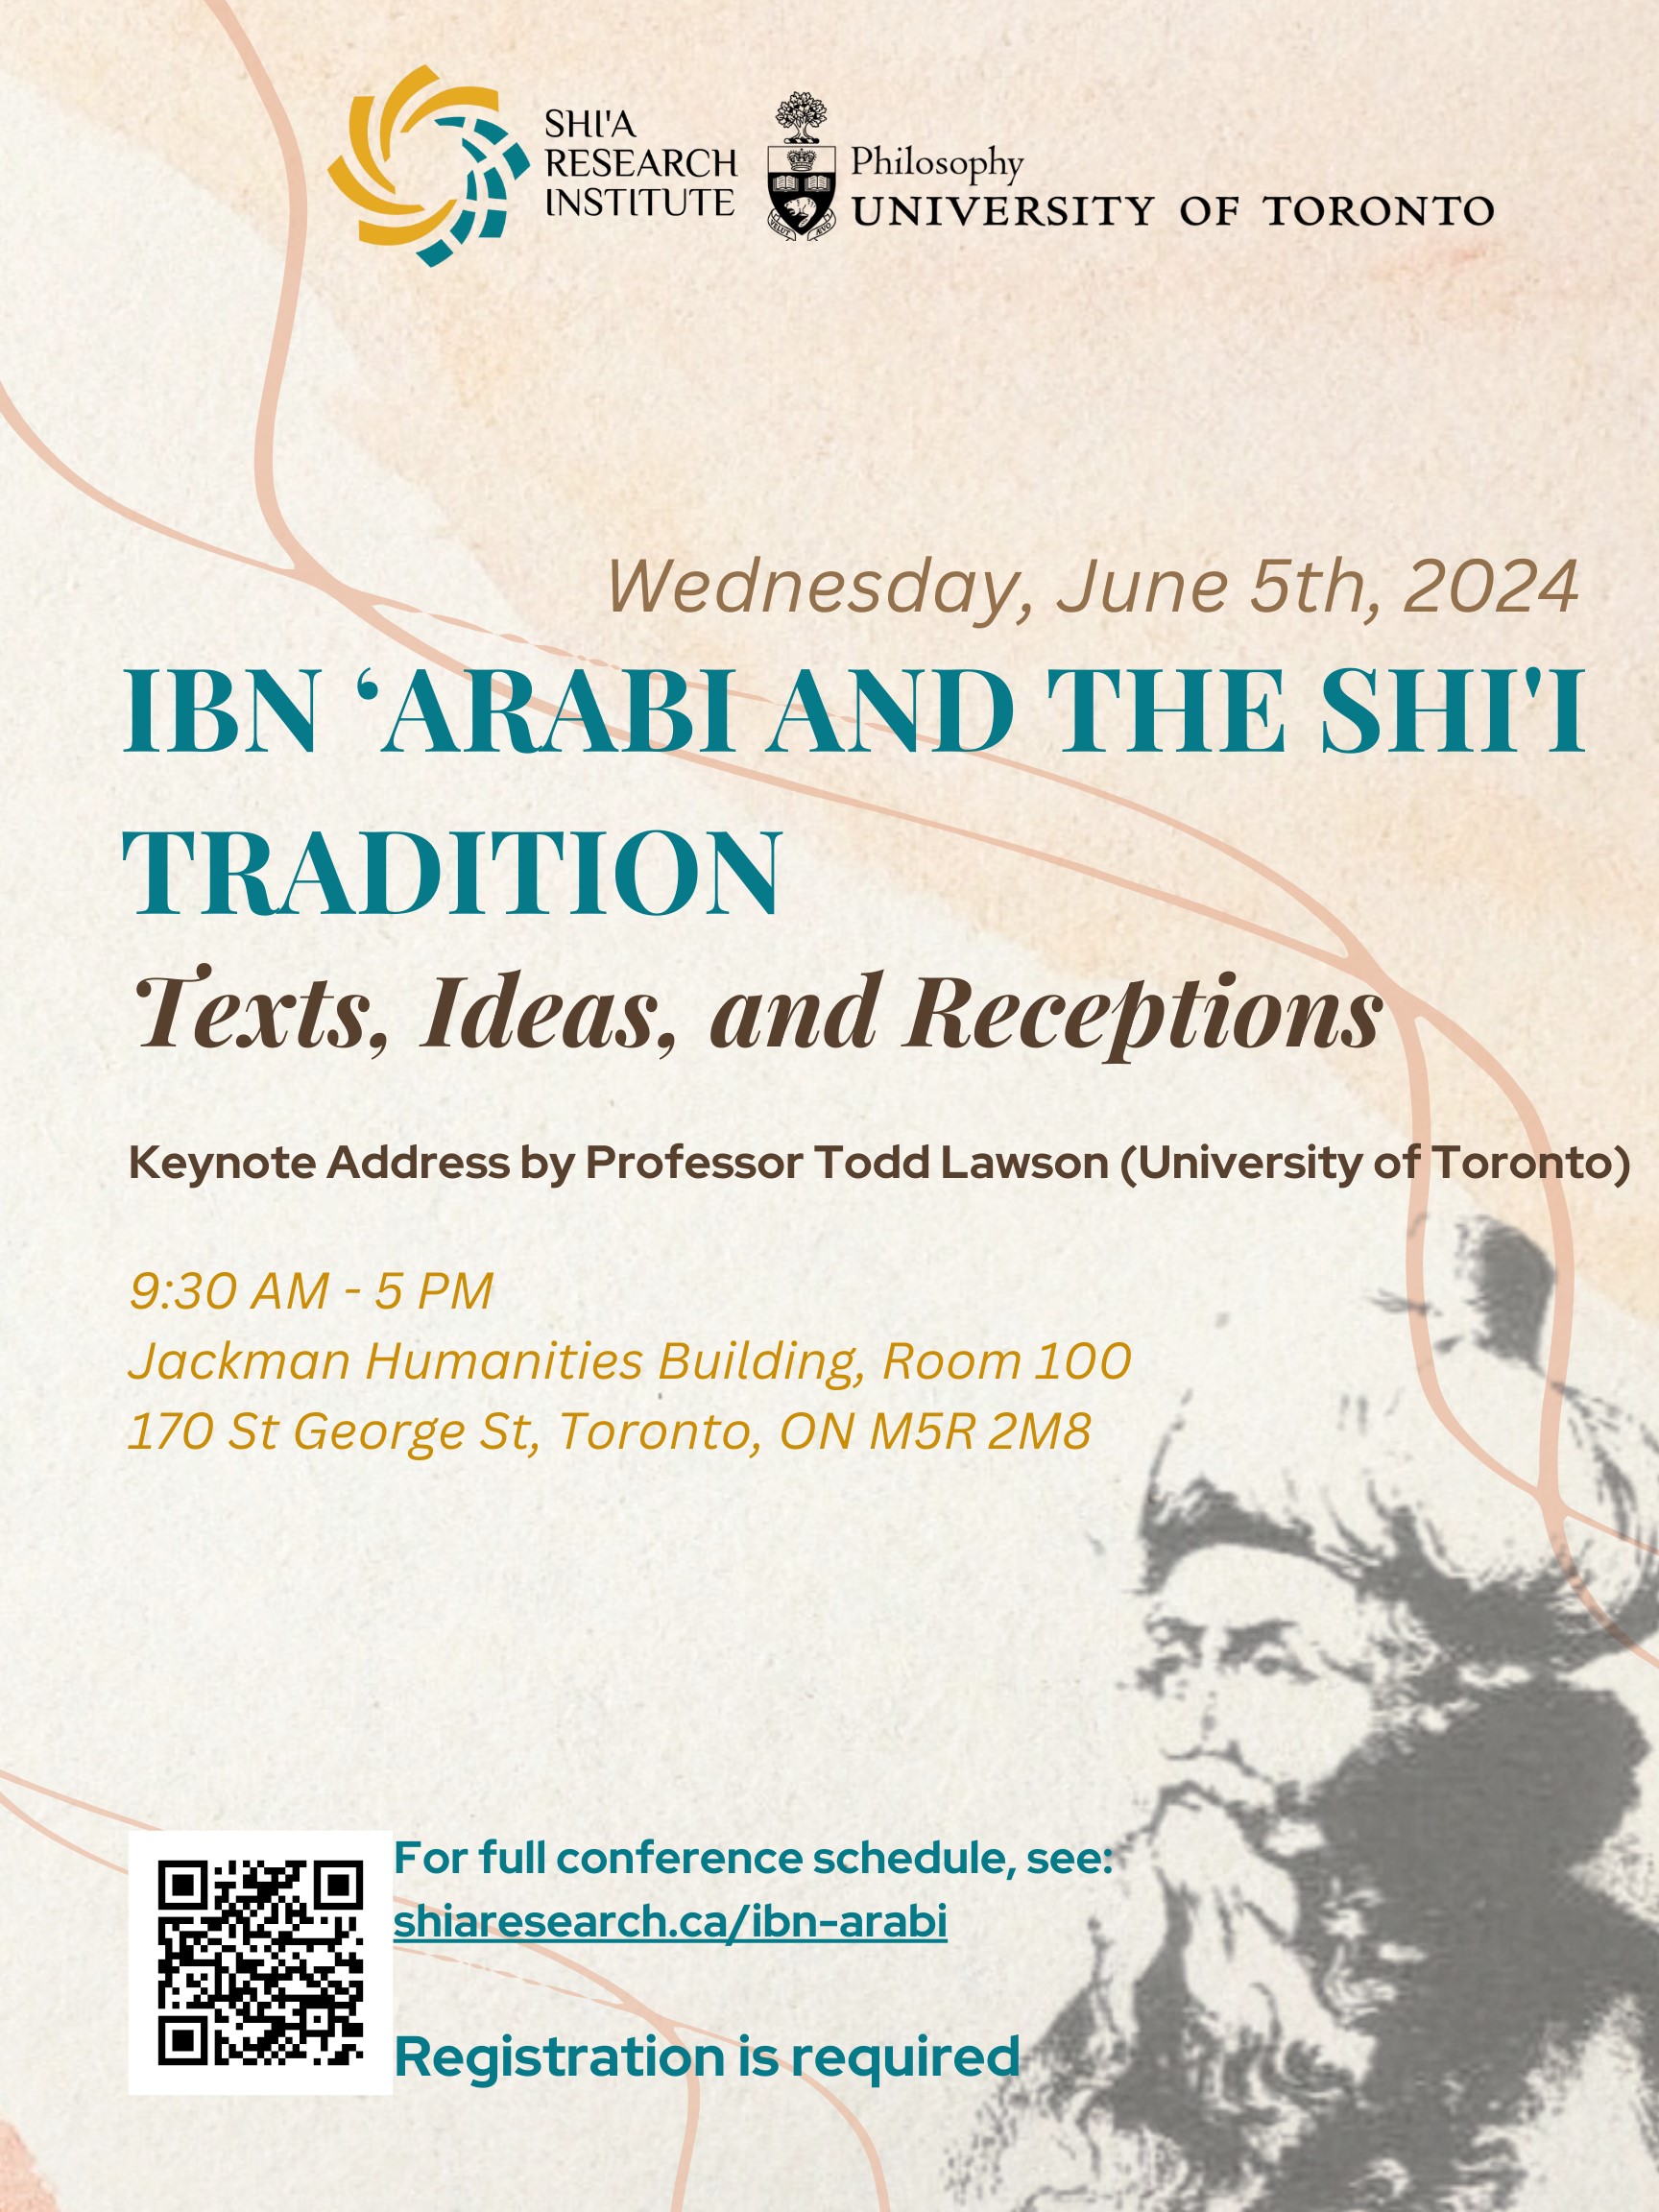 Ibn ‘Arabi and the Shi’i Tradition: Texts, Ideas, and Receptions